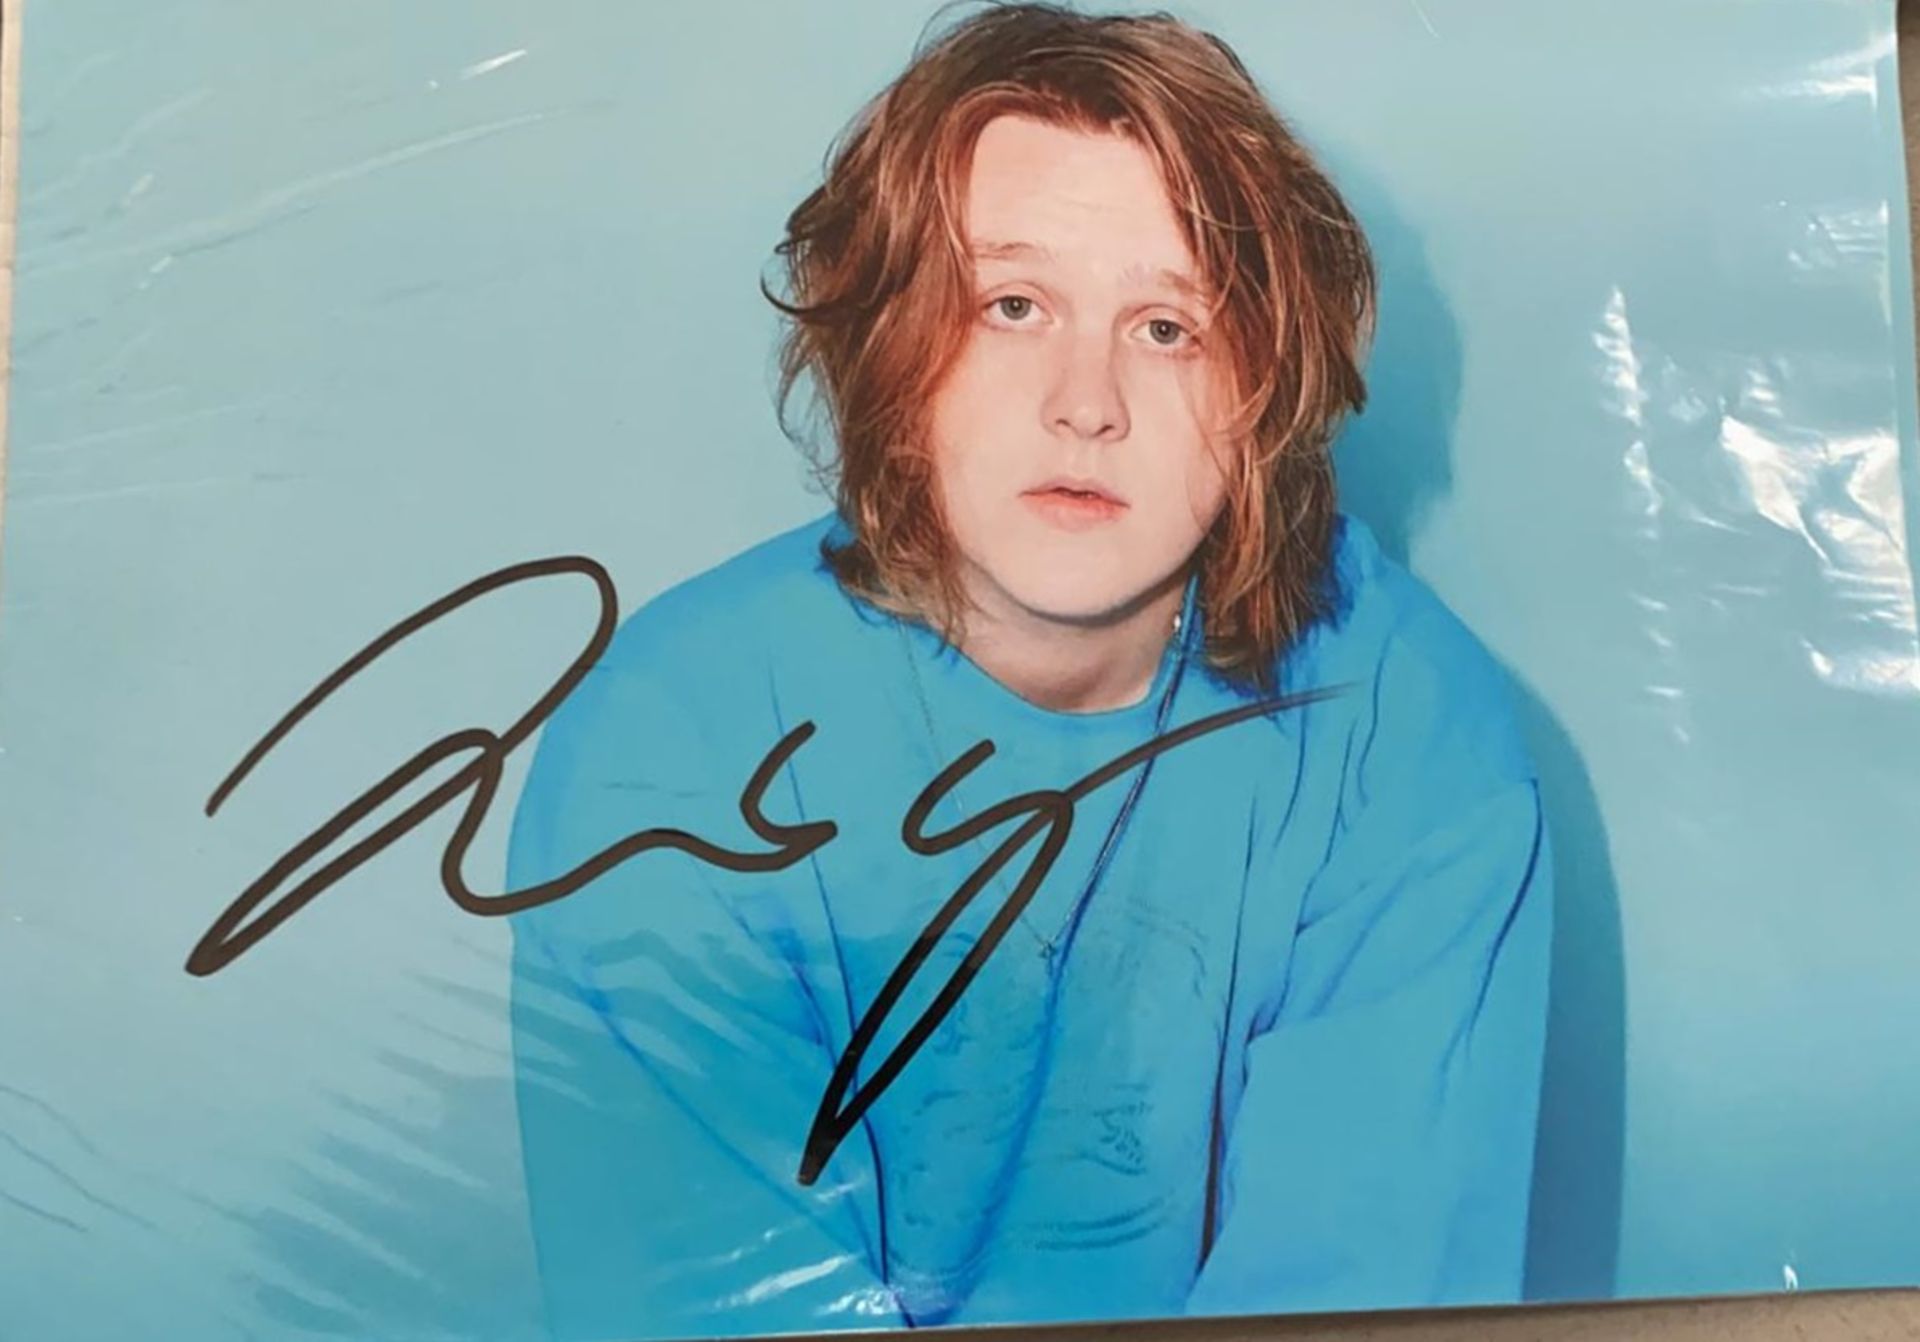 1 x Signed Autograph Picture - LEWIS CAPALDI - With COA  - CL590 - NO VAT ON THE HAMMER PRICE -